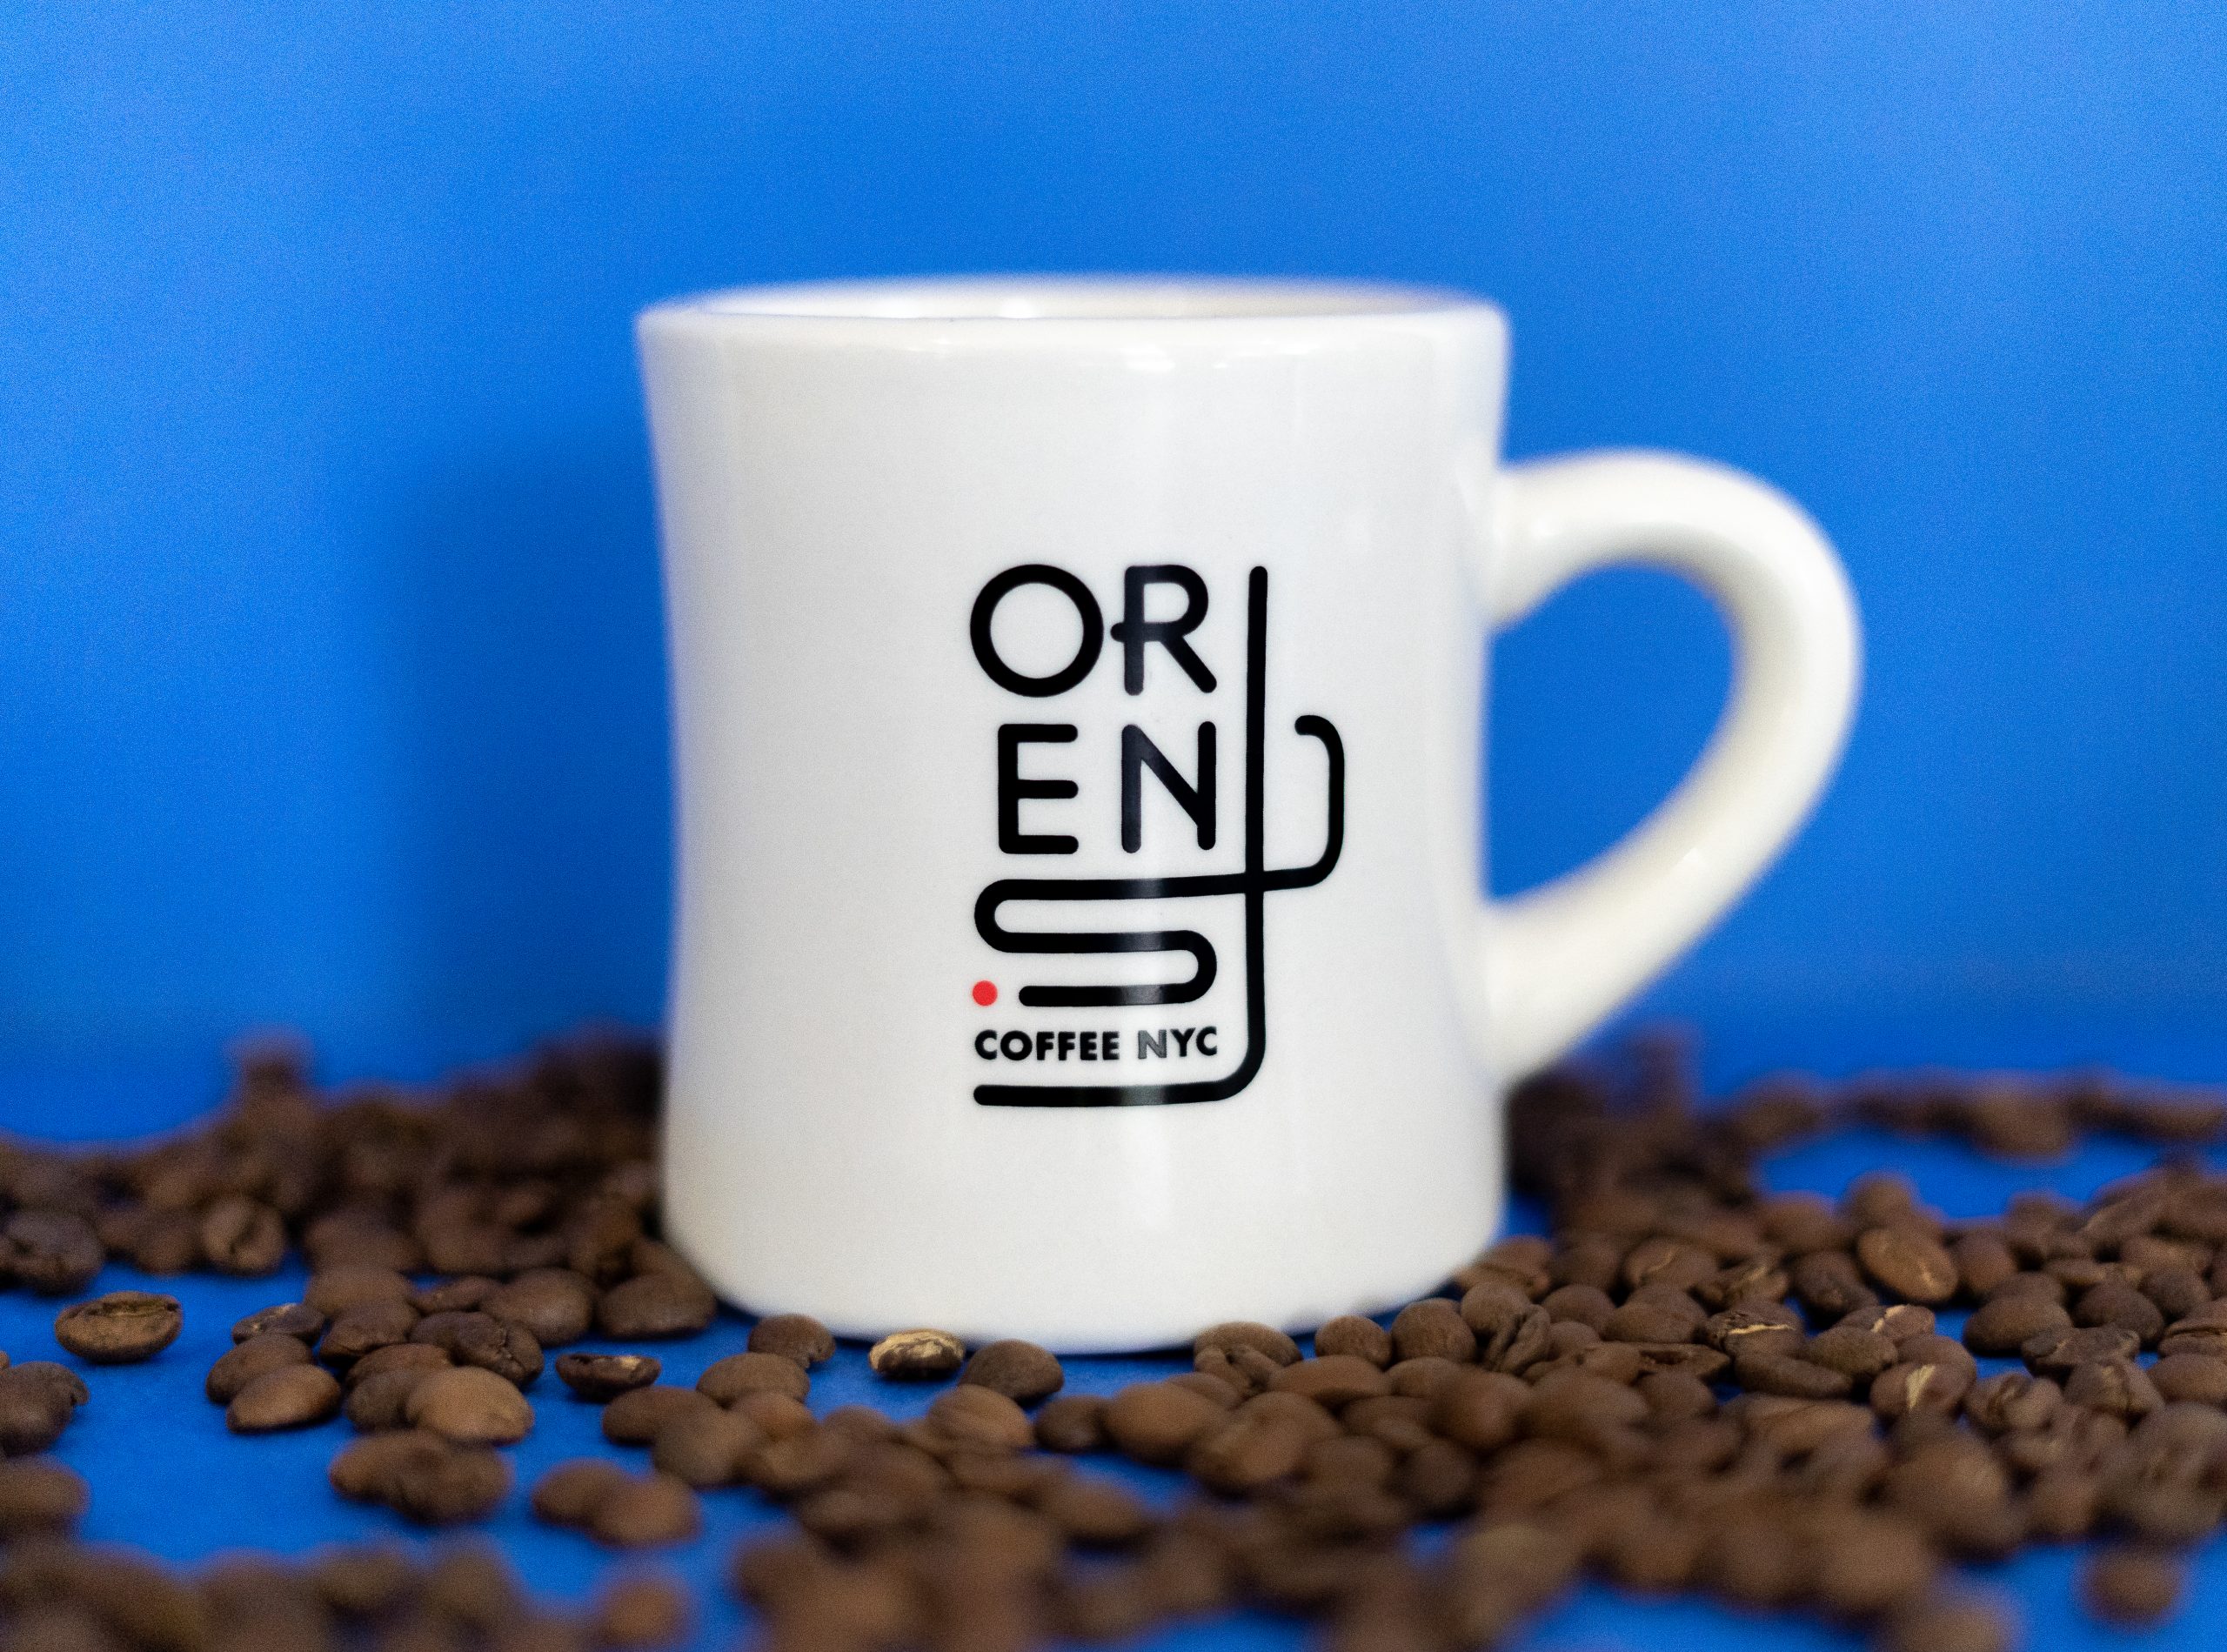 Up close view of a diner mug with the new Orens logo